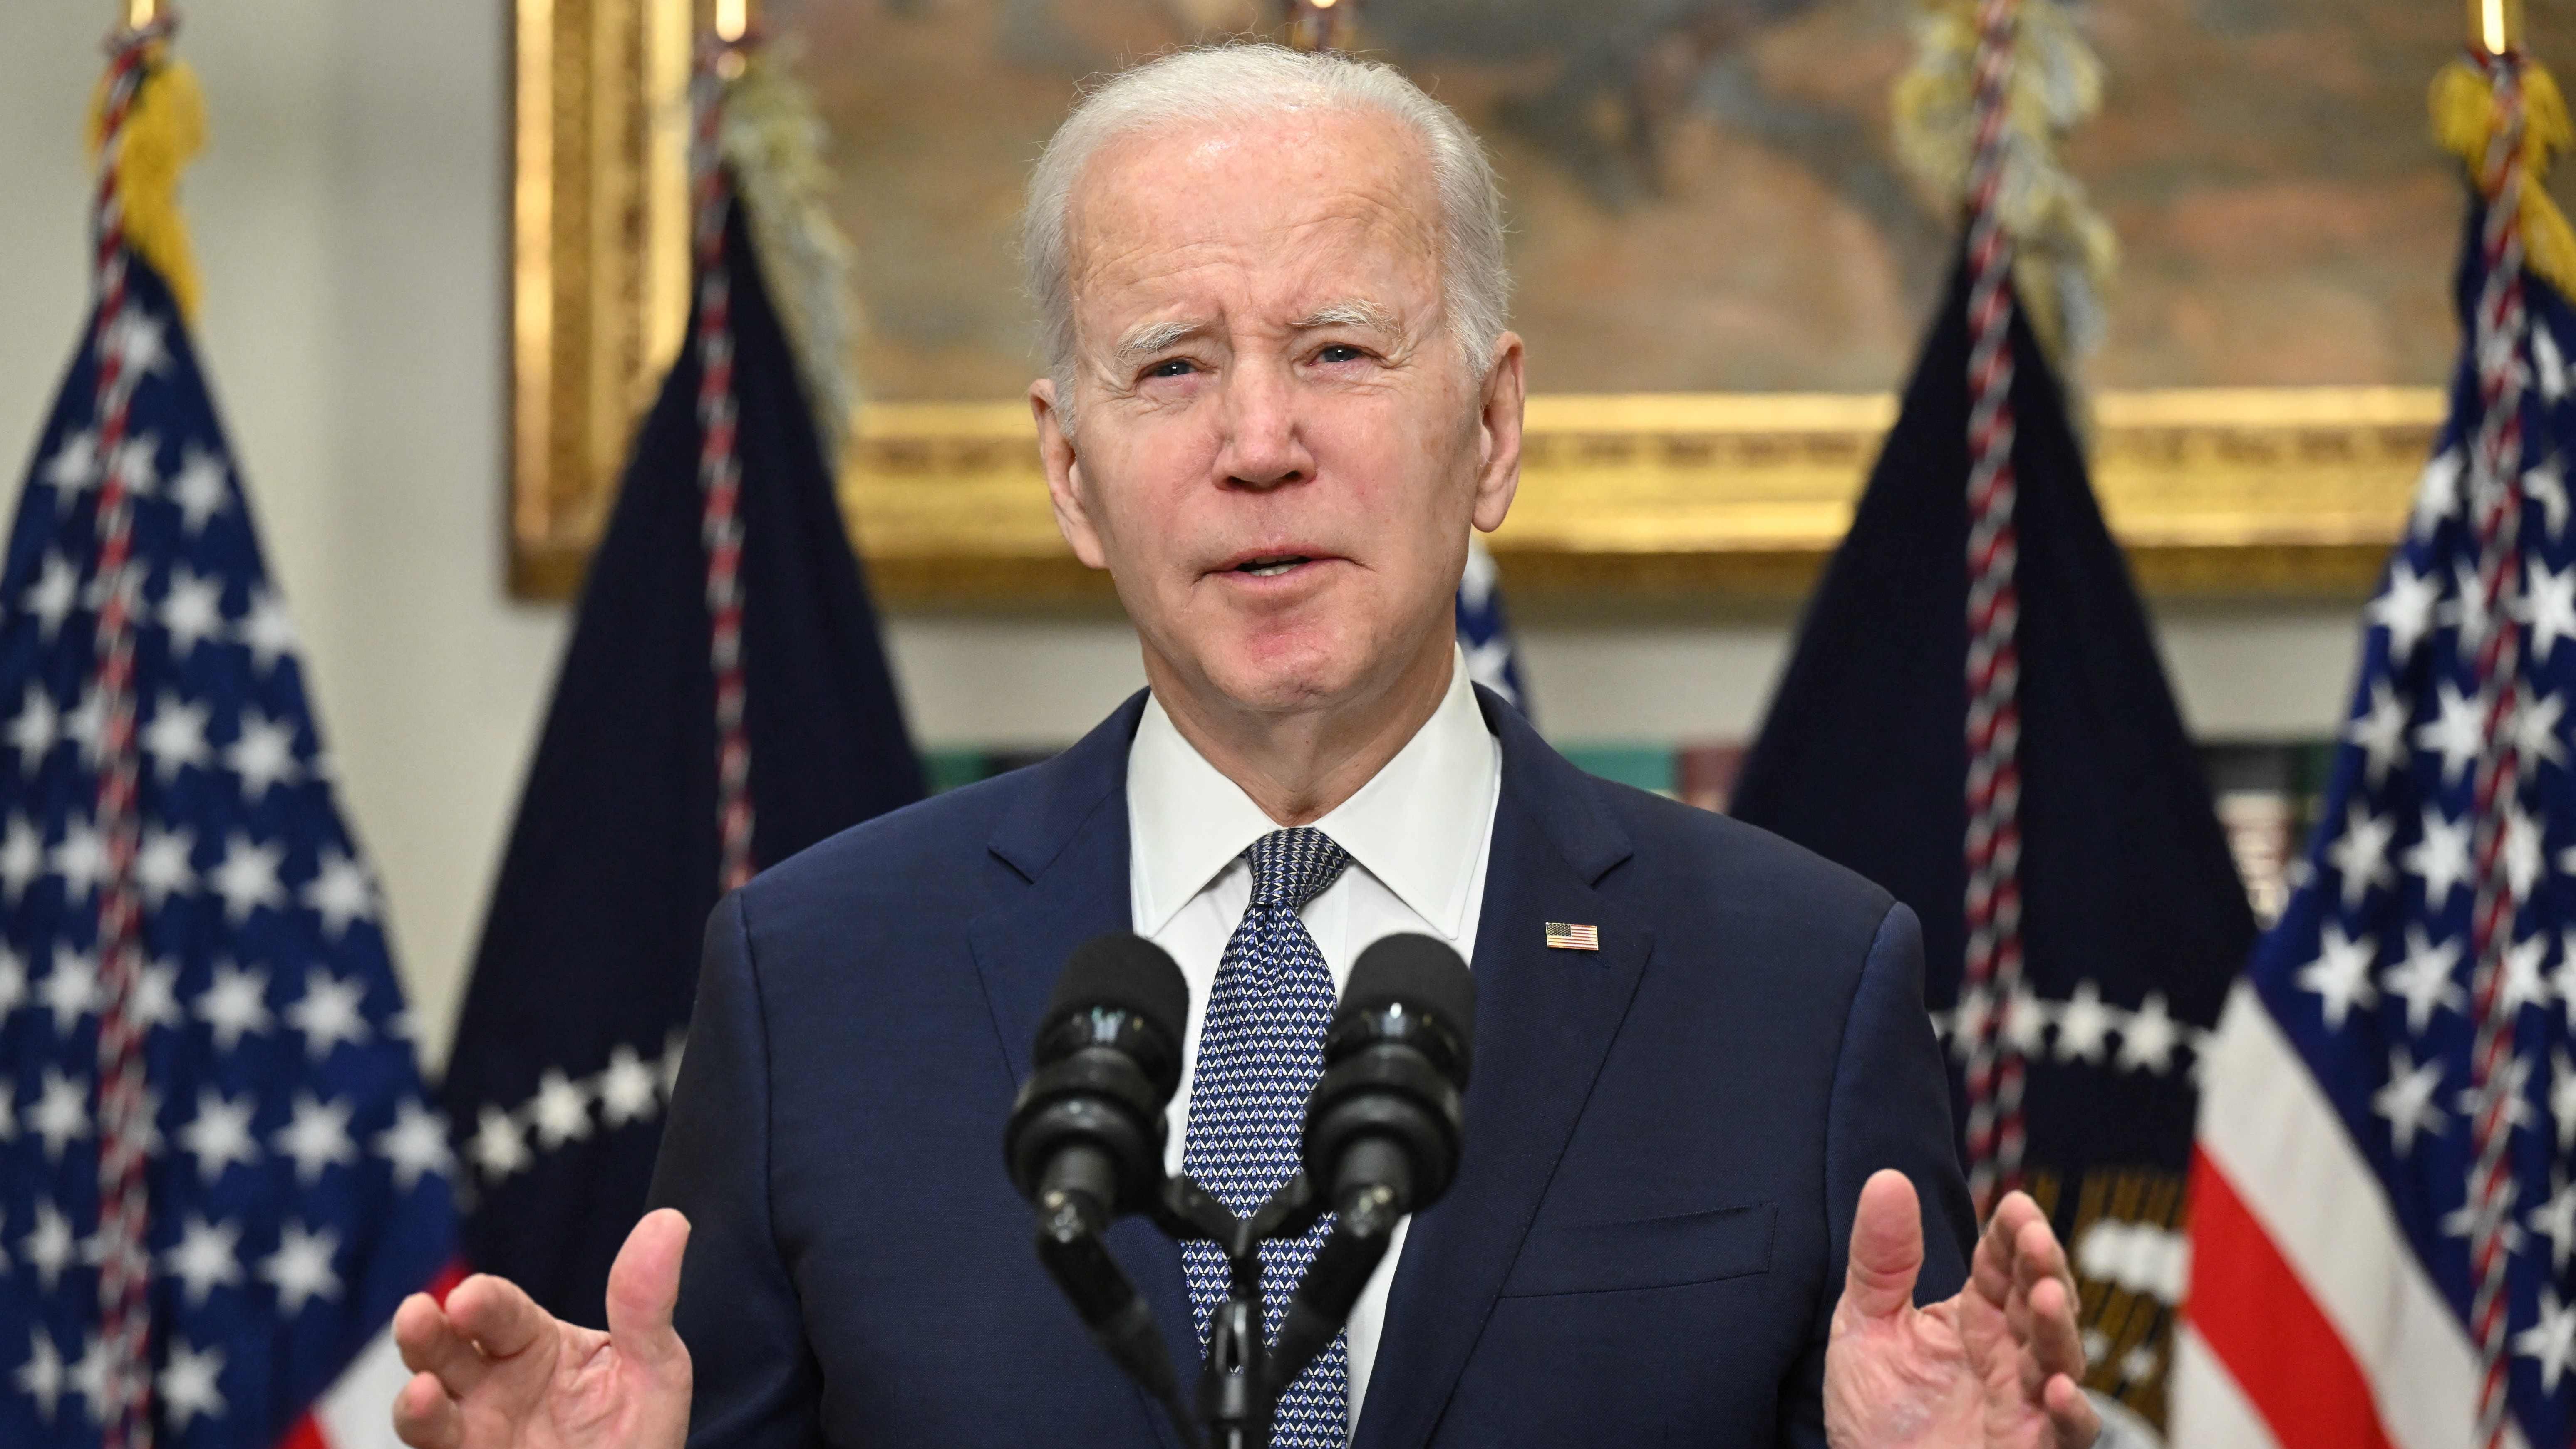 President Joe Biden speaks about the US banking system on March 13, 2023 in the Roosevelt Room of the White House in Washington, D..